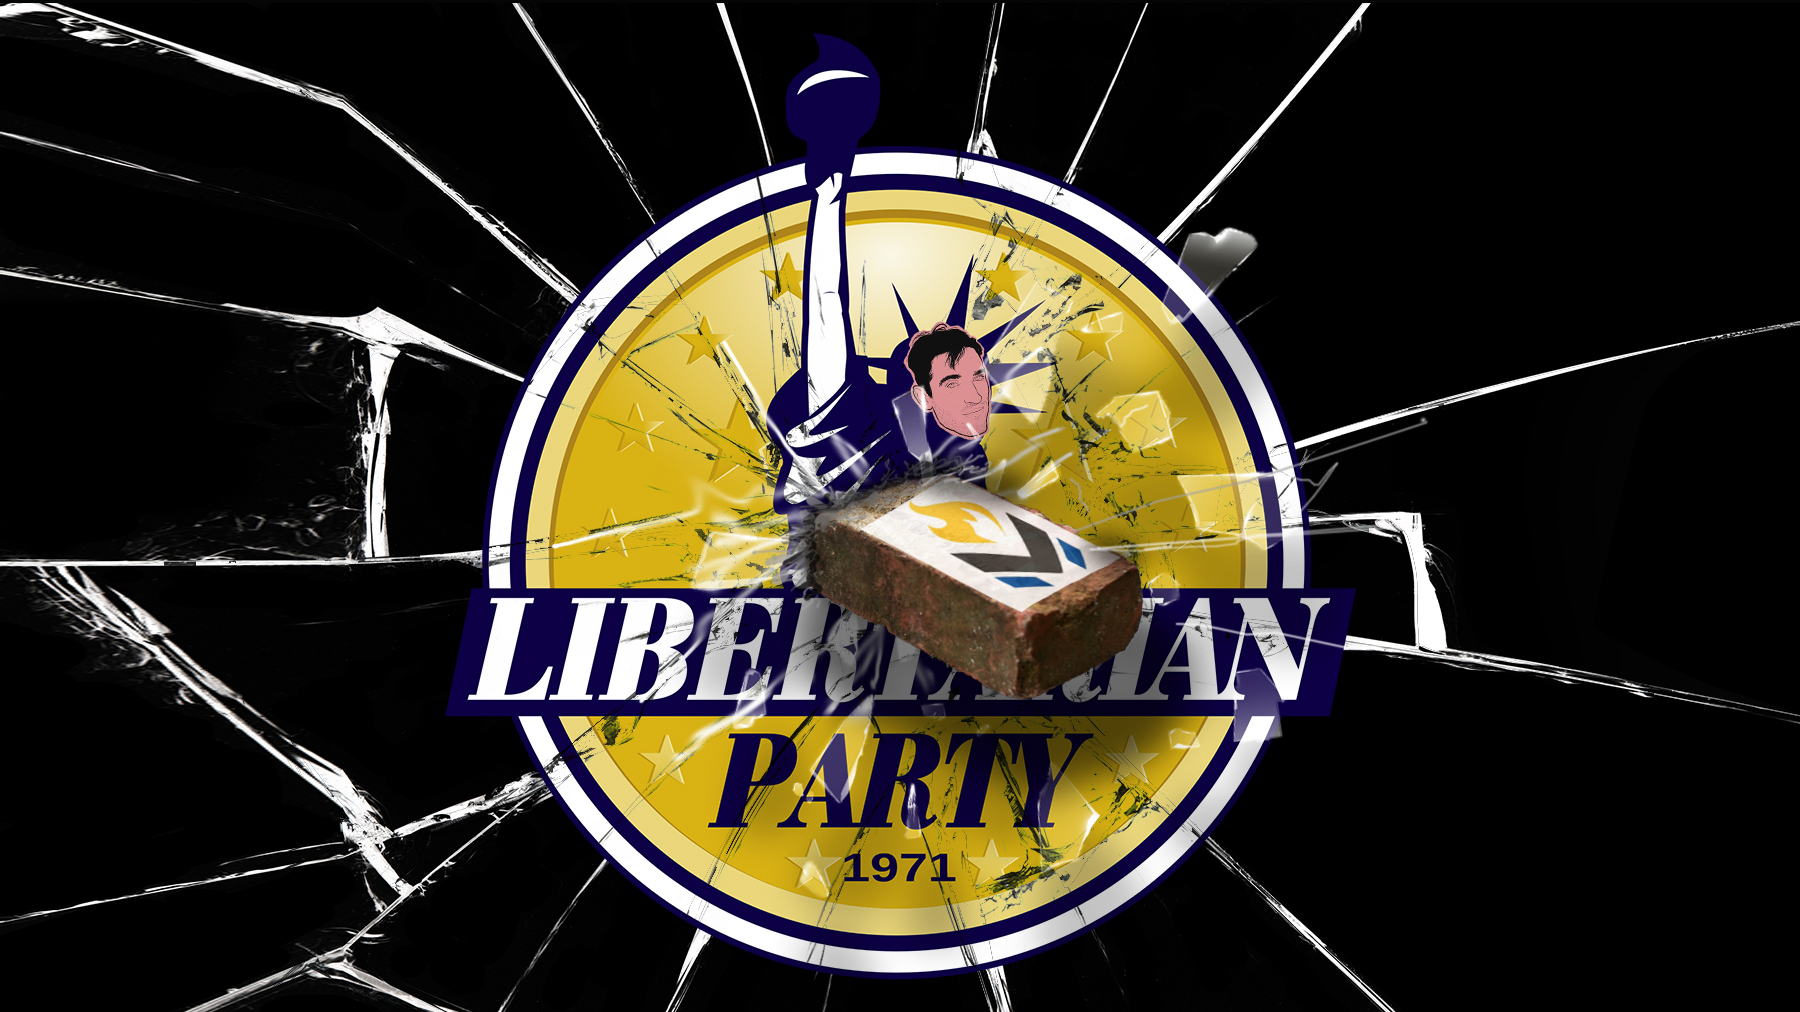 Libertarian Party Loses State Parties, Donors After Hardright Turn